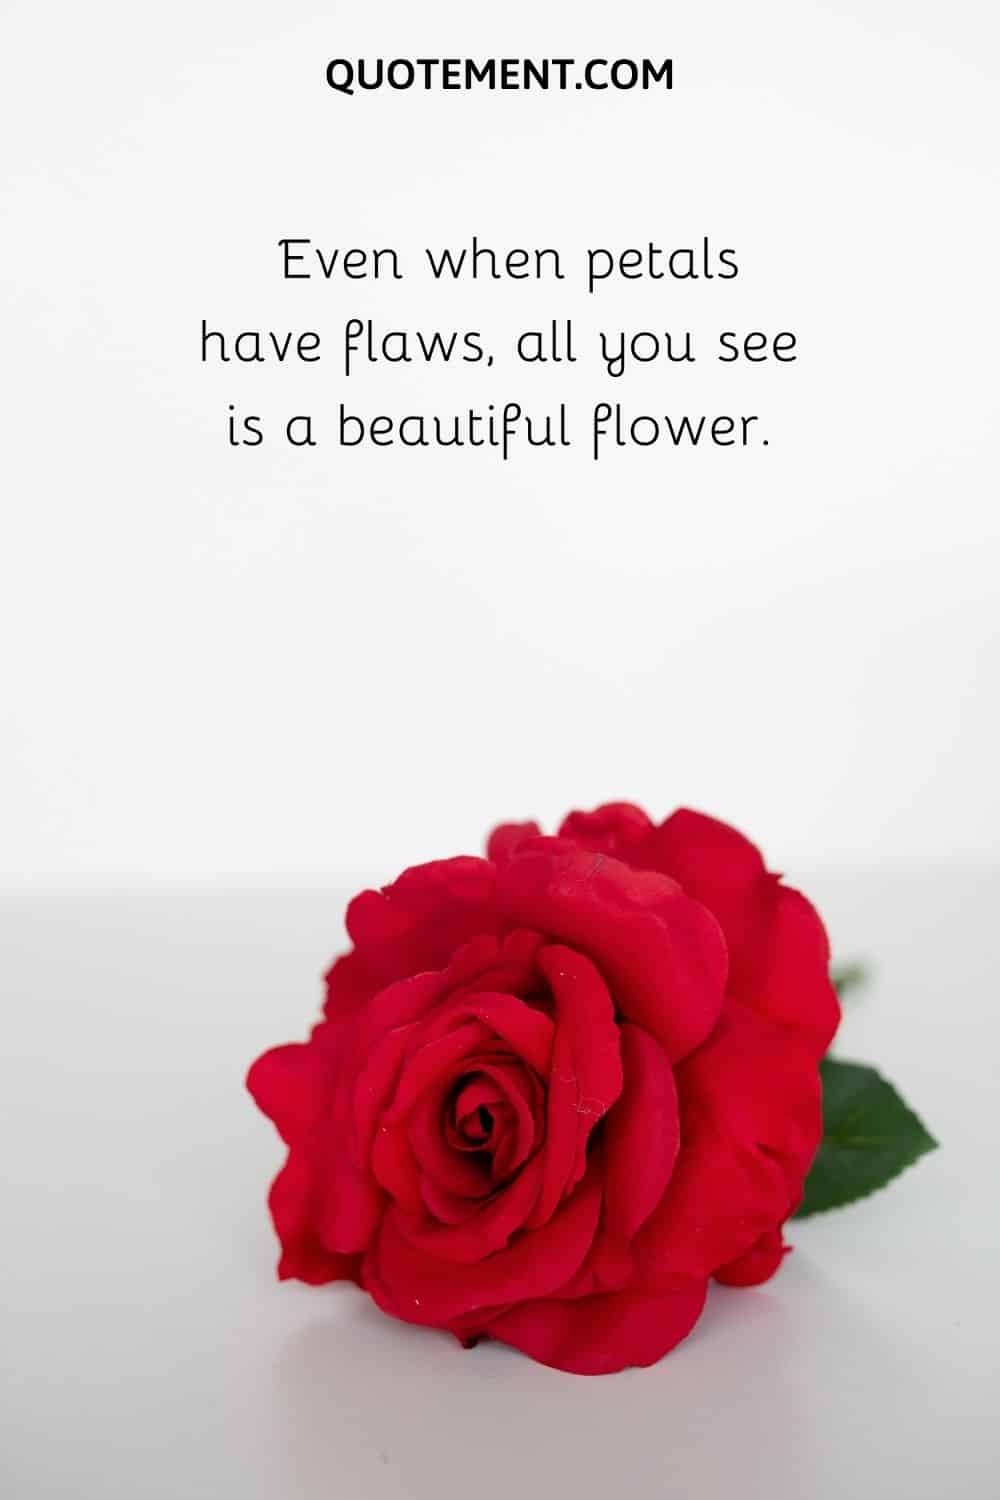 Even when petals have flaws, all you see is a beautiful flower.